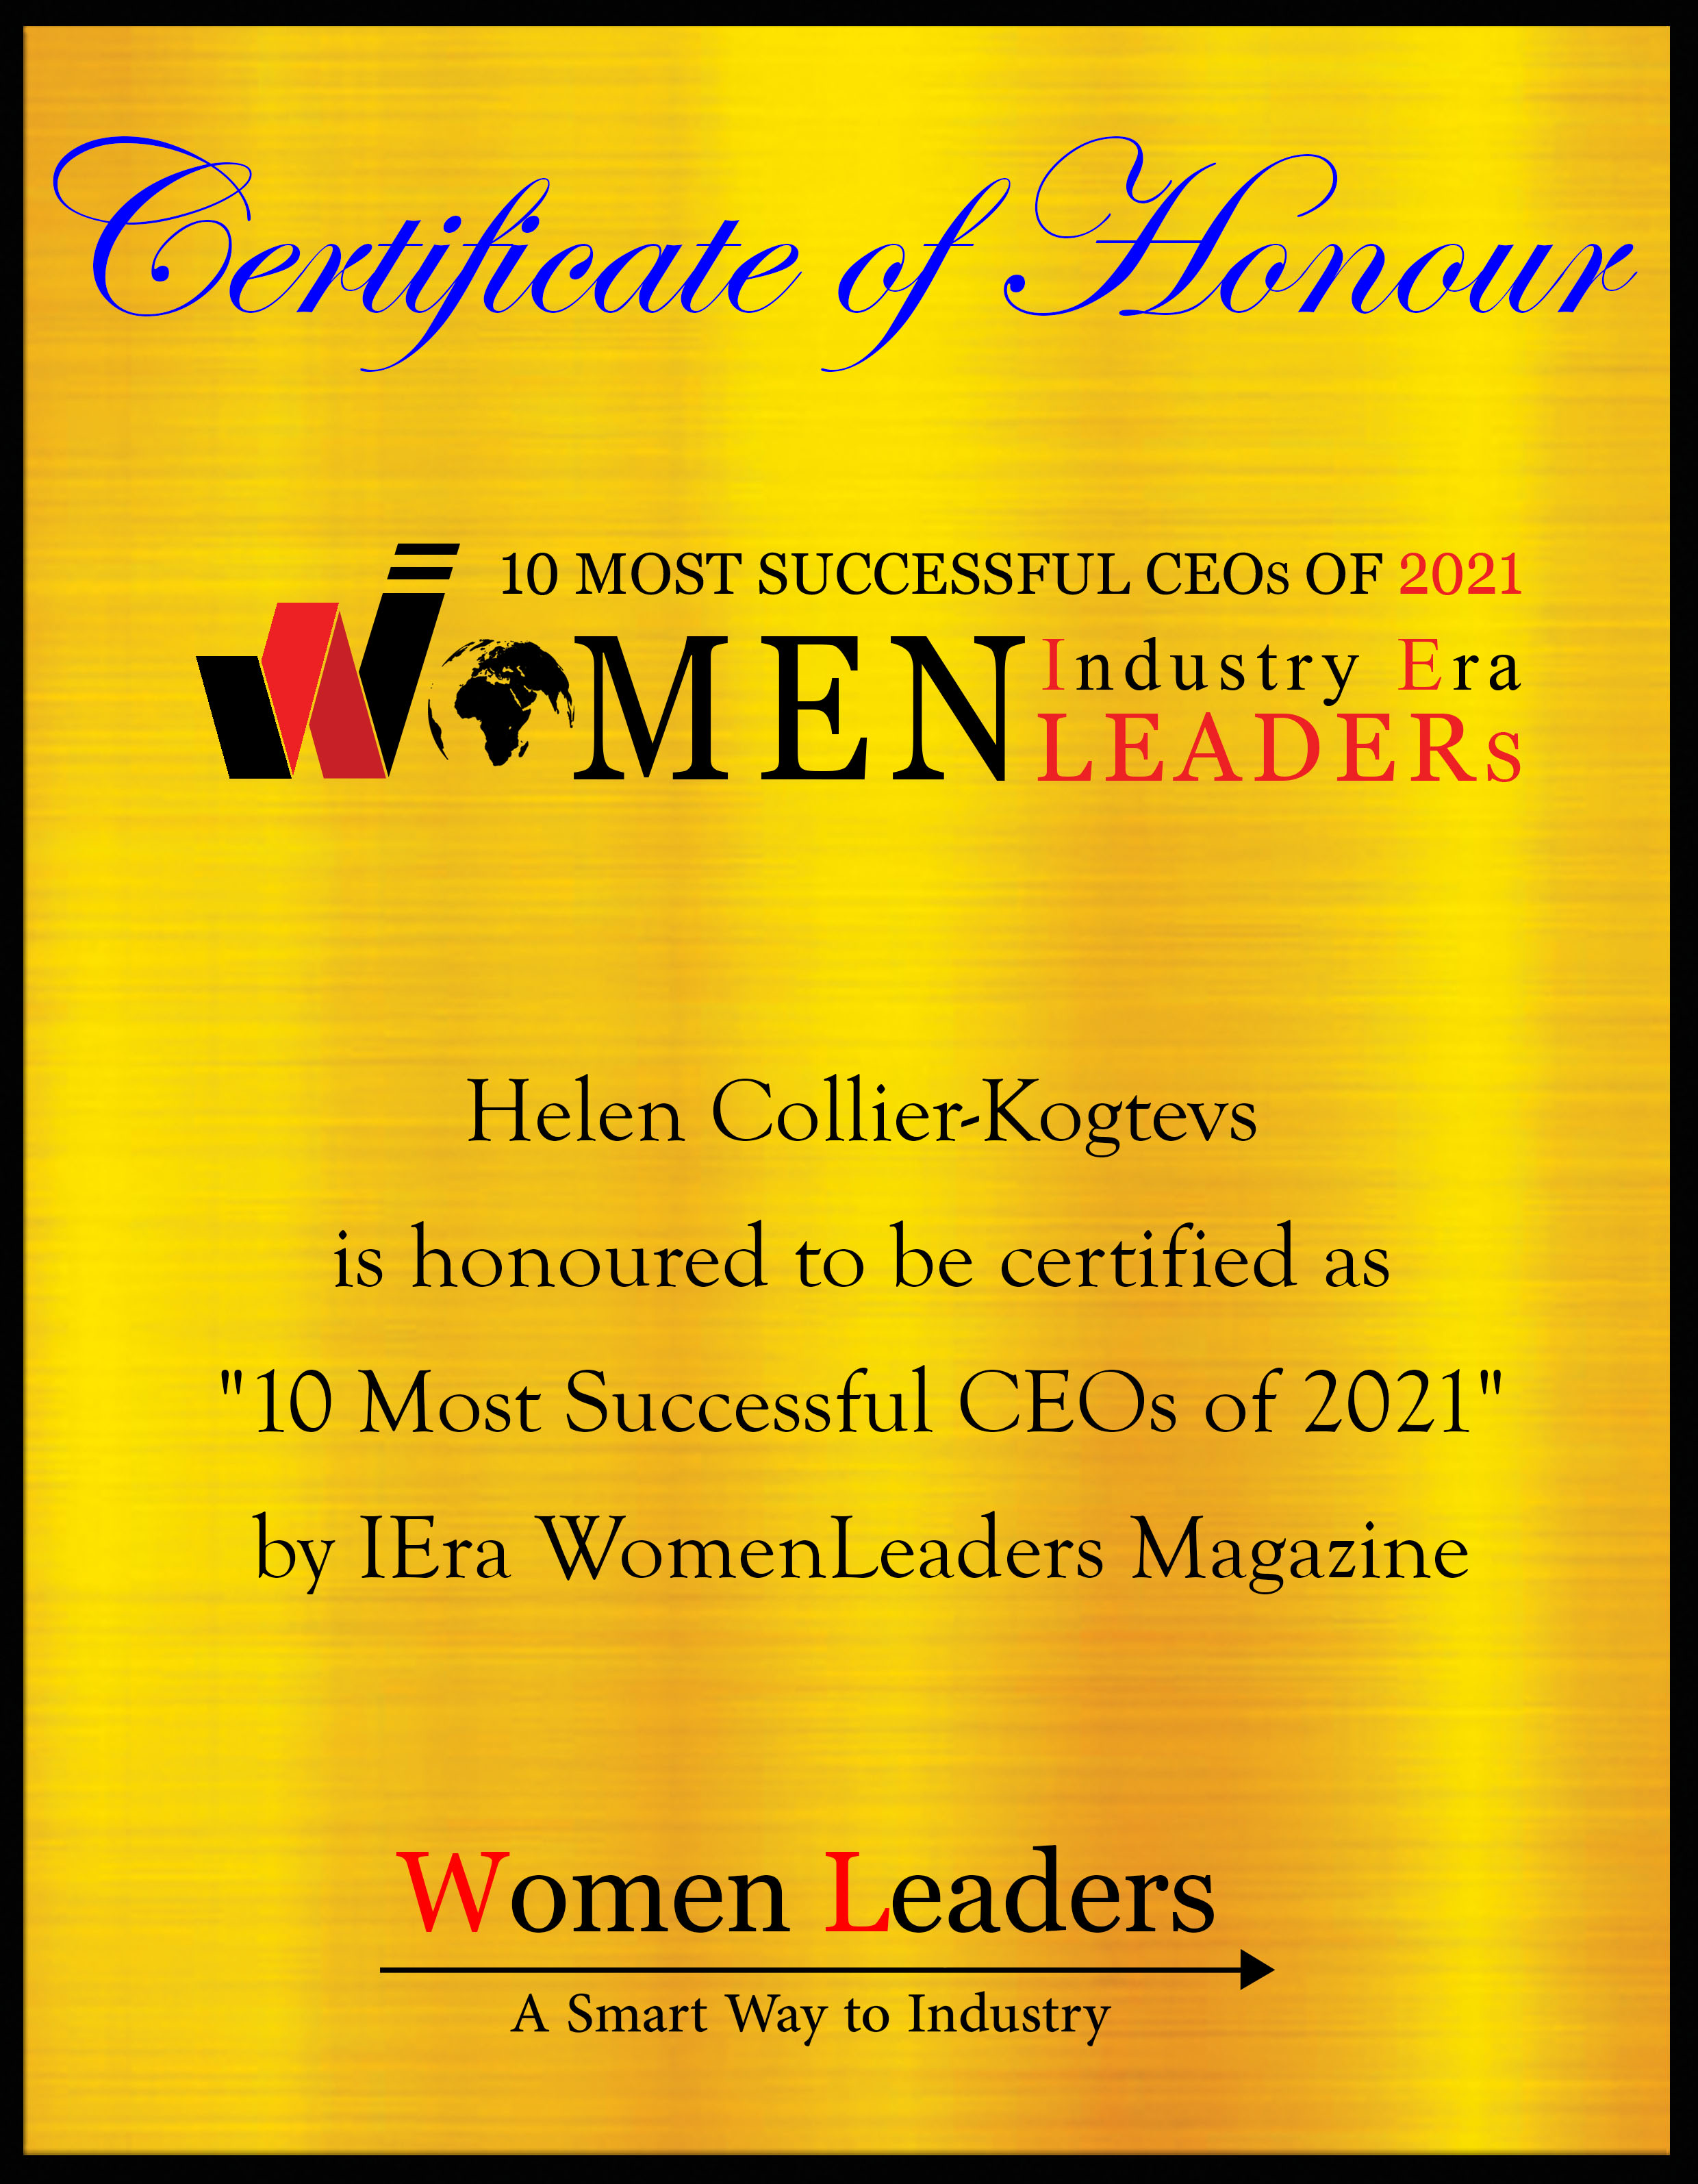 Helen Collier-Kogtevs, Founder and CEO at eLINK Finance, Best Successful CEOs of 2021